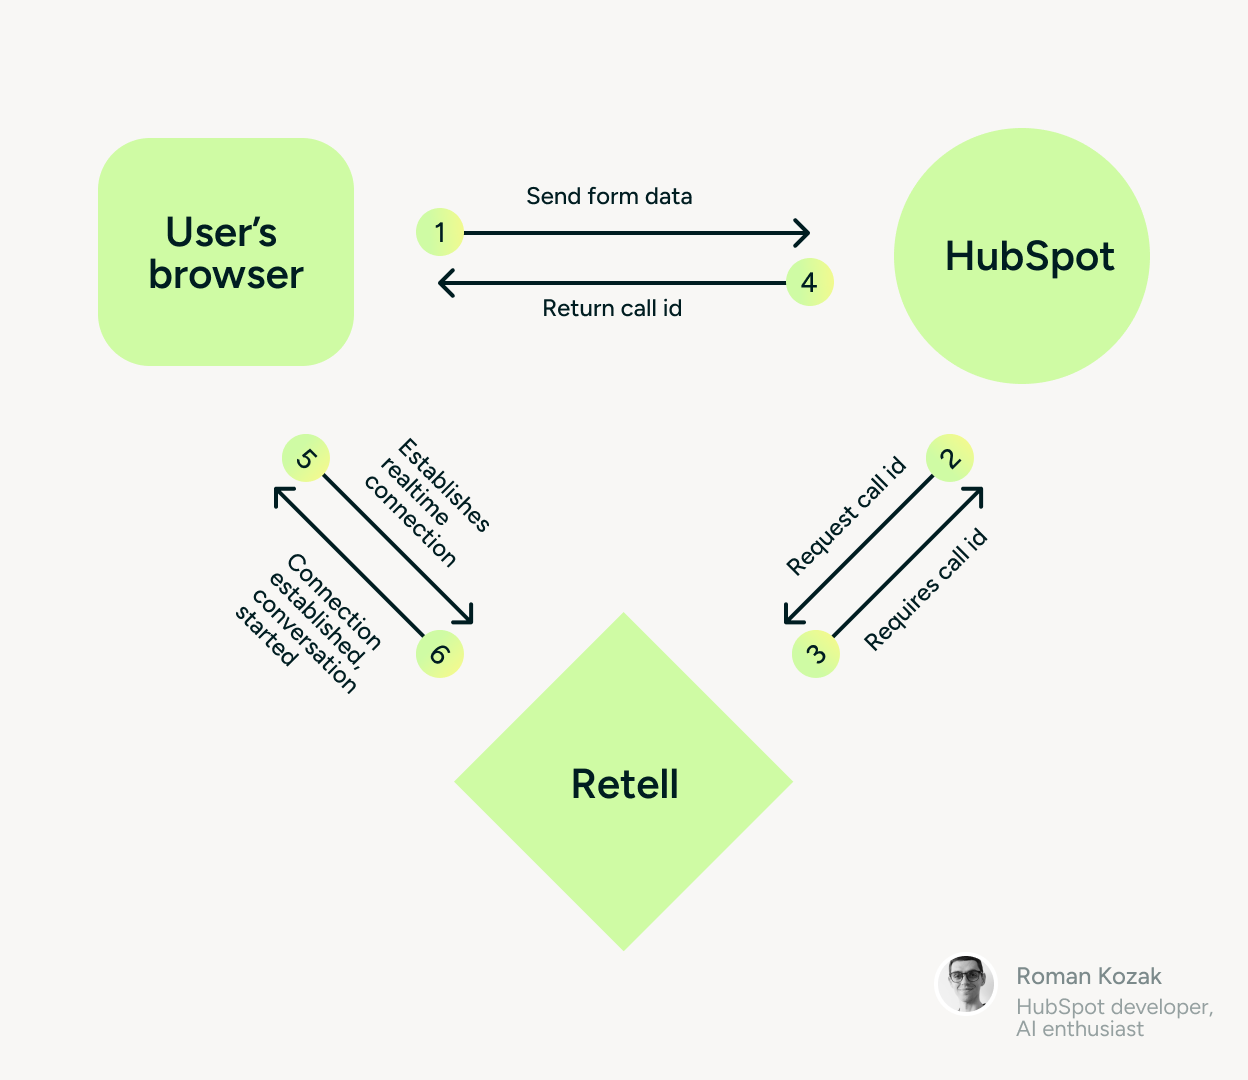 User's browser sends form data to HubSpot, which requests the call ID from Retell. Retell returns the call id, HubSpot returns call Id to user's browser. User's browser establishes a realtime connection with Retell, Retell responds with connection established connection started.